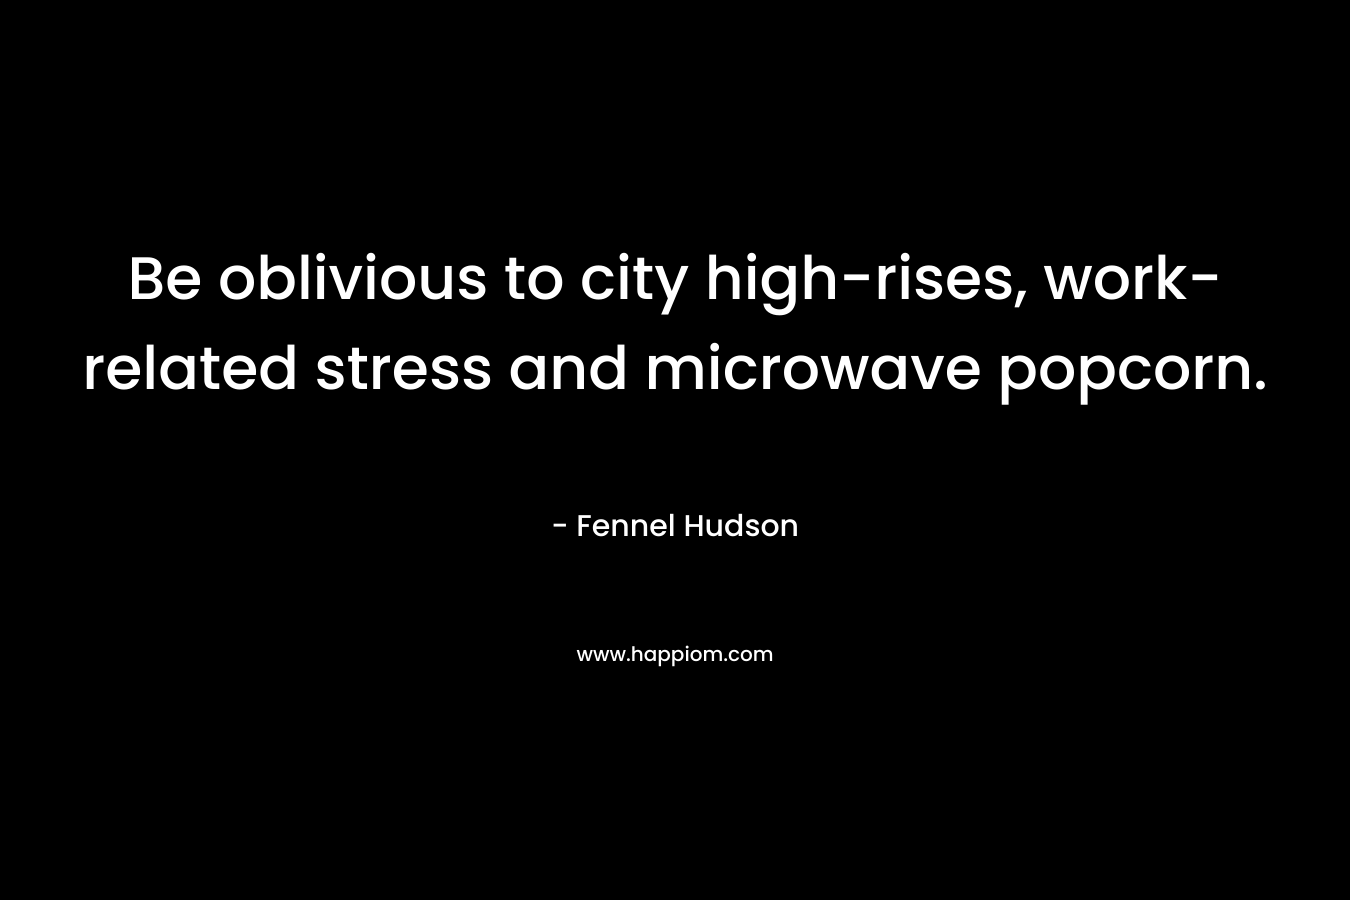 Be oblivious to city high-rises, work-related stress and microwave popcorn. – Fennel Hudson